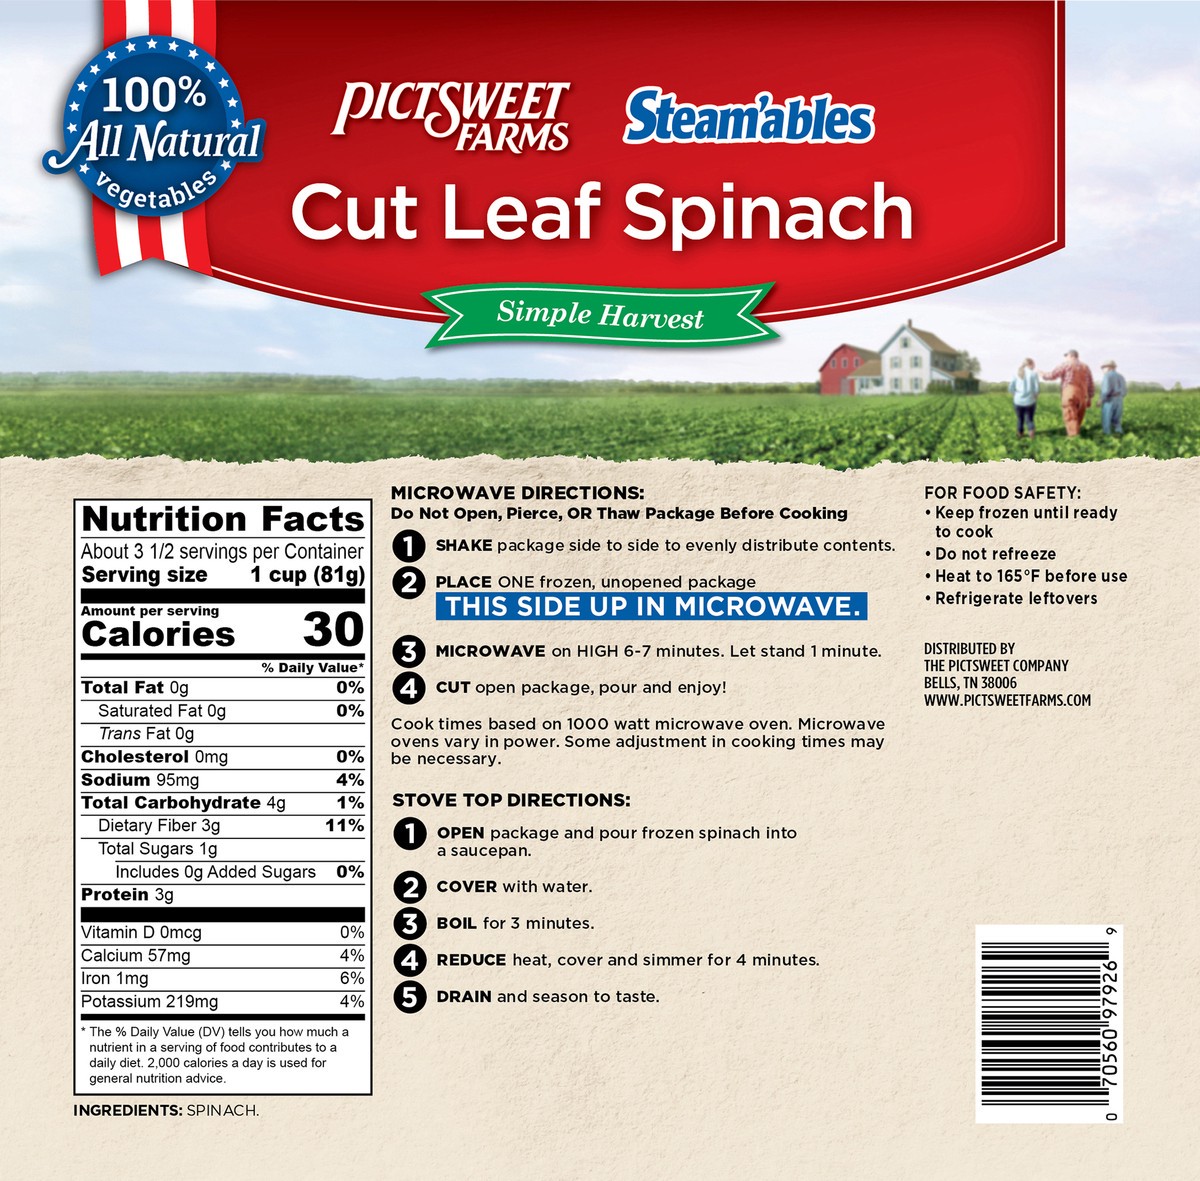 slide 2 of 3, Pictsweet Farms Steam'ables Cut Leaf Spinach, Simple Harvest - 10 oz, 10 oz